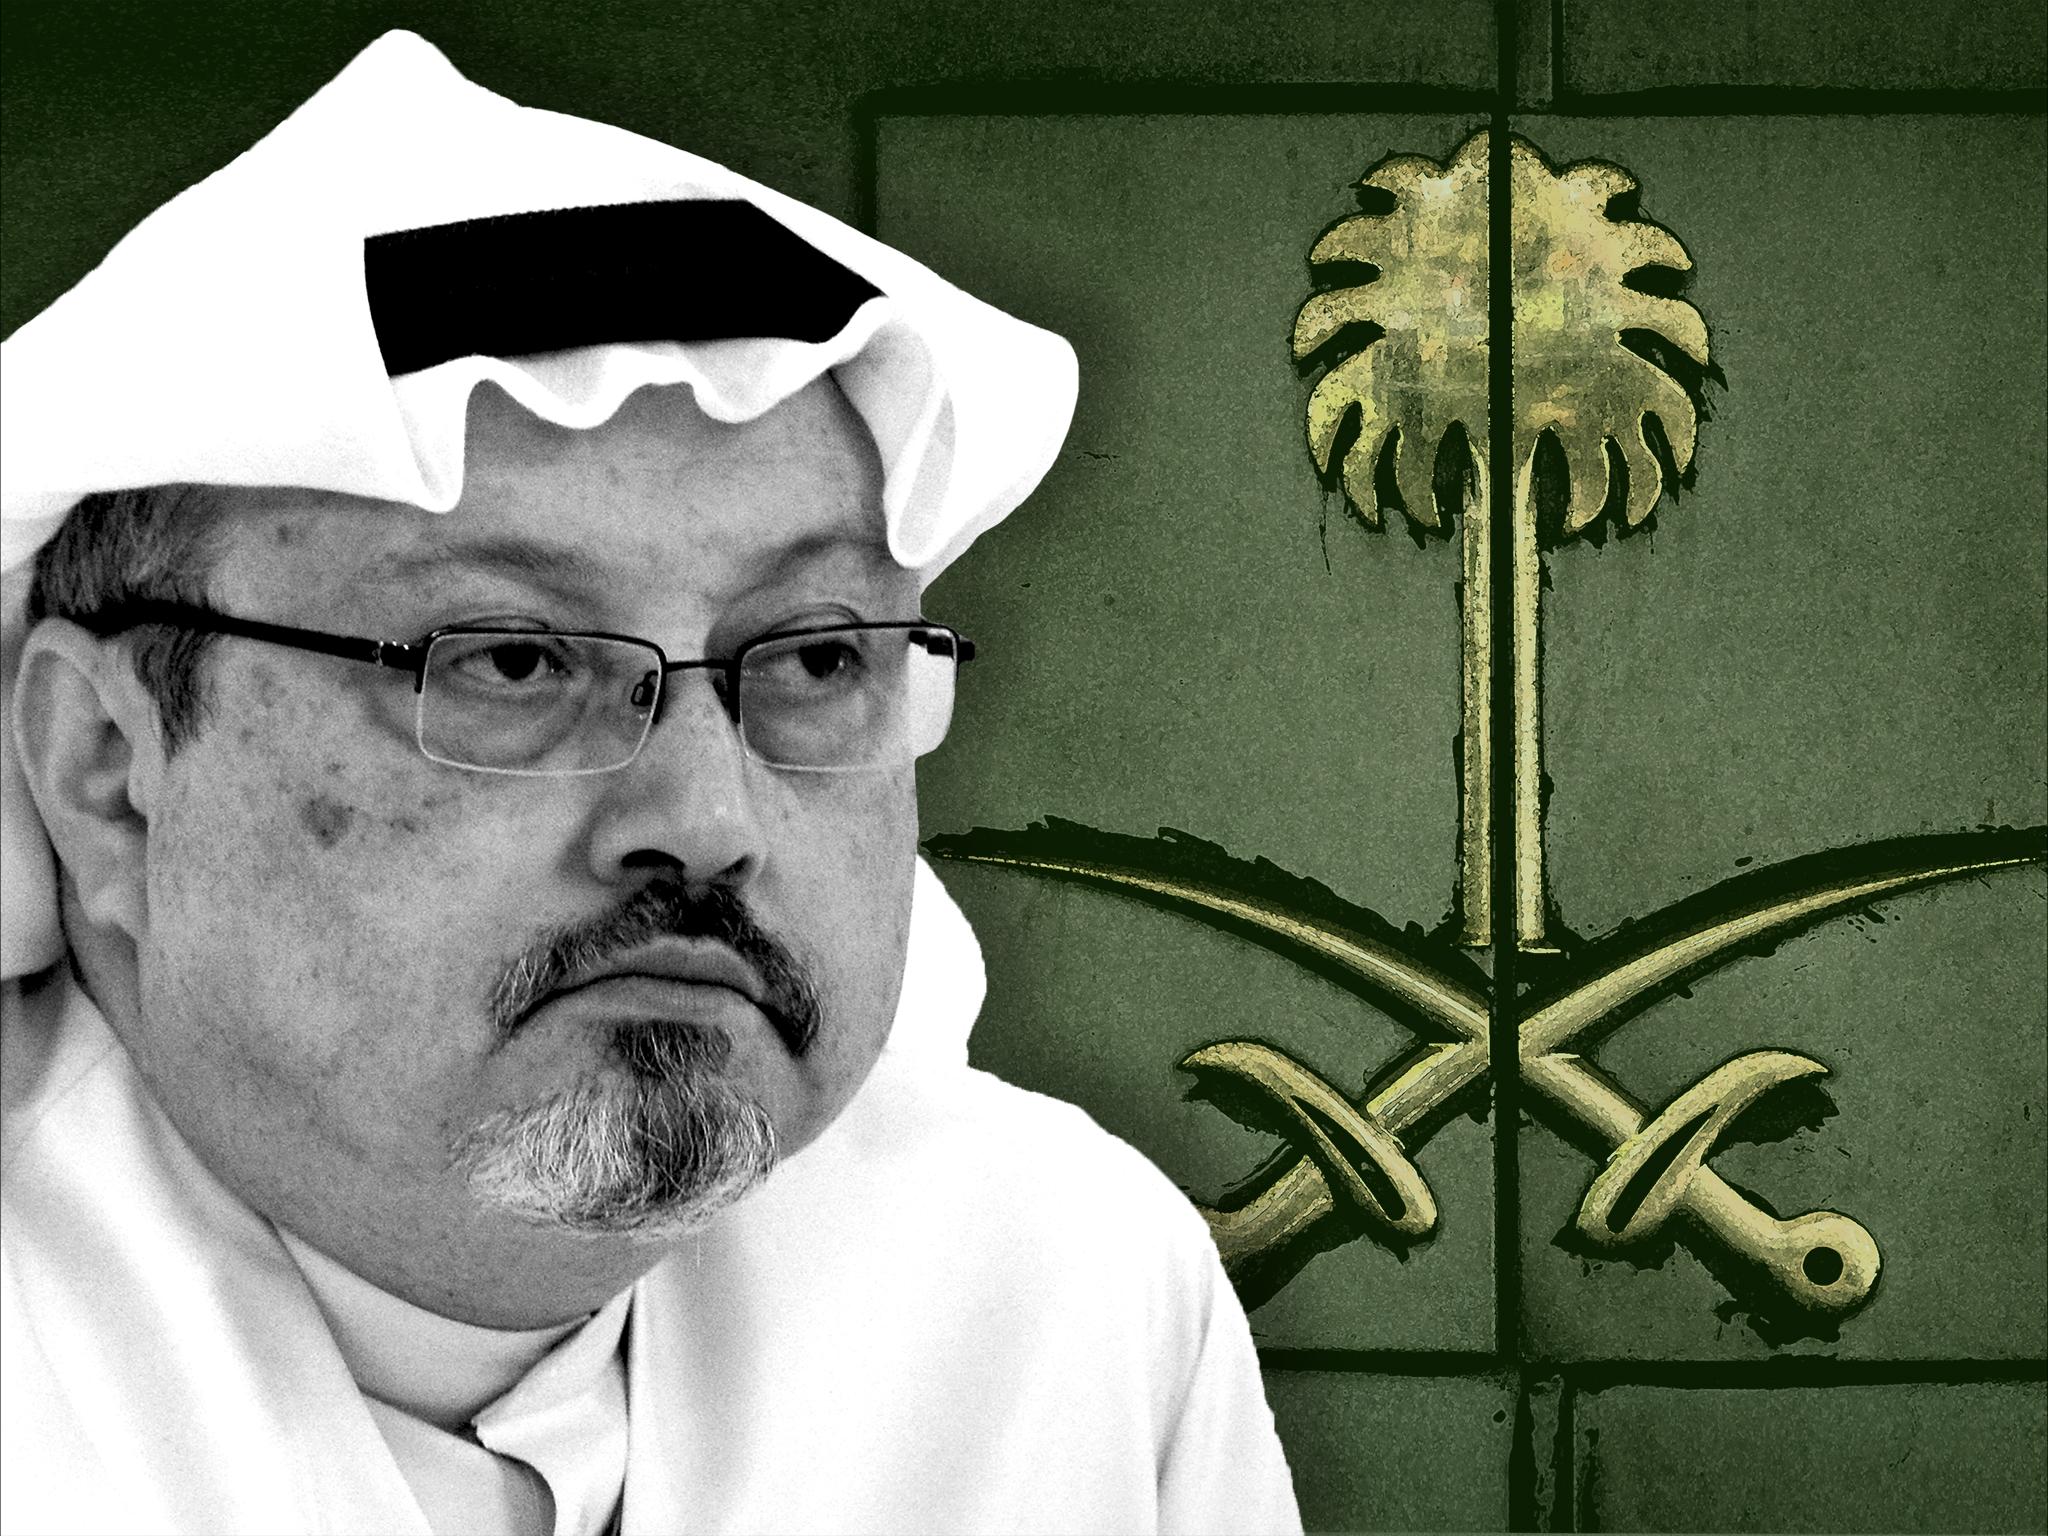 Jamal Khashoggi was killed and dismembered at his country’s consulate in Istanbul in October last year